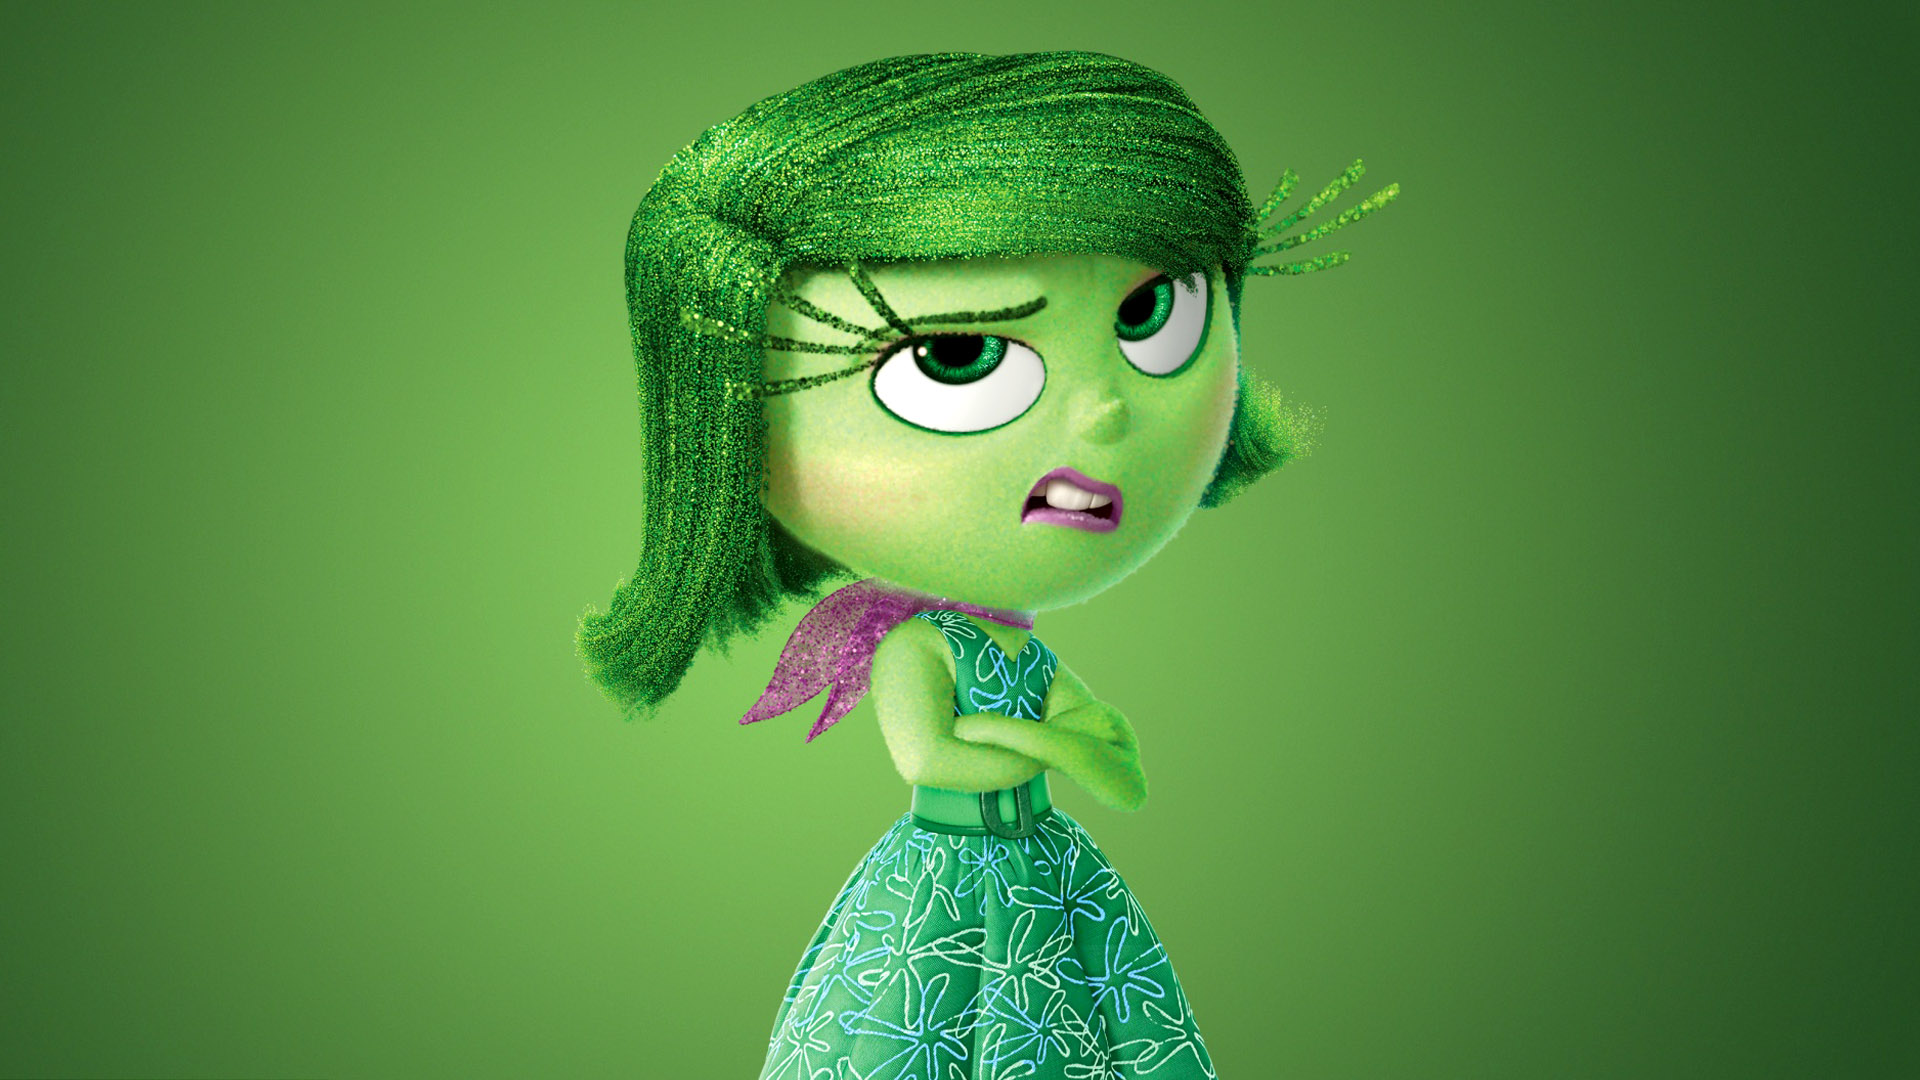 Inside Out 2015 Wallpapers Best Wallpapers 1920x1080